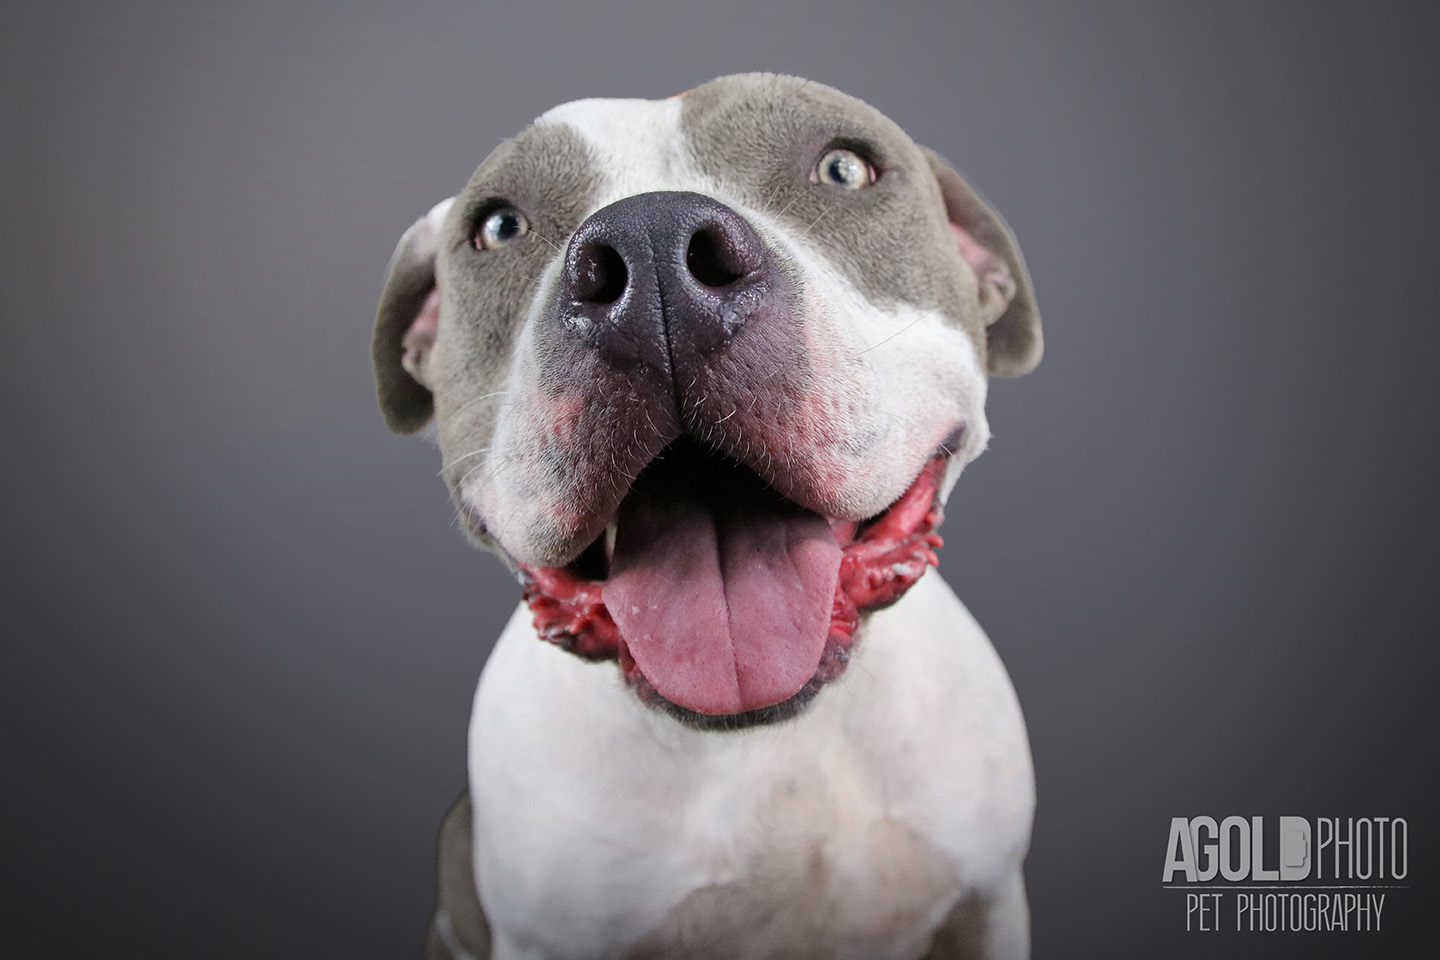 cheif_agoldphoto-tampa-pet-photography__agoldphoto-tampa-pet-photography_